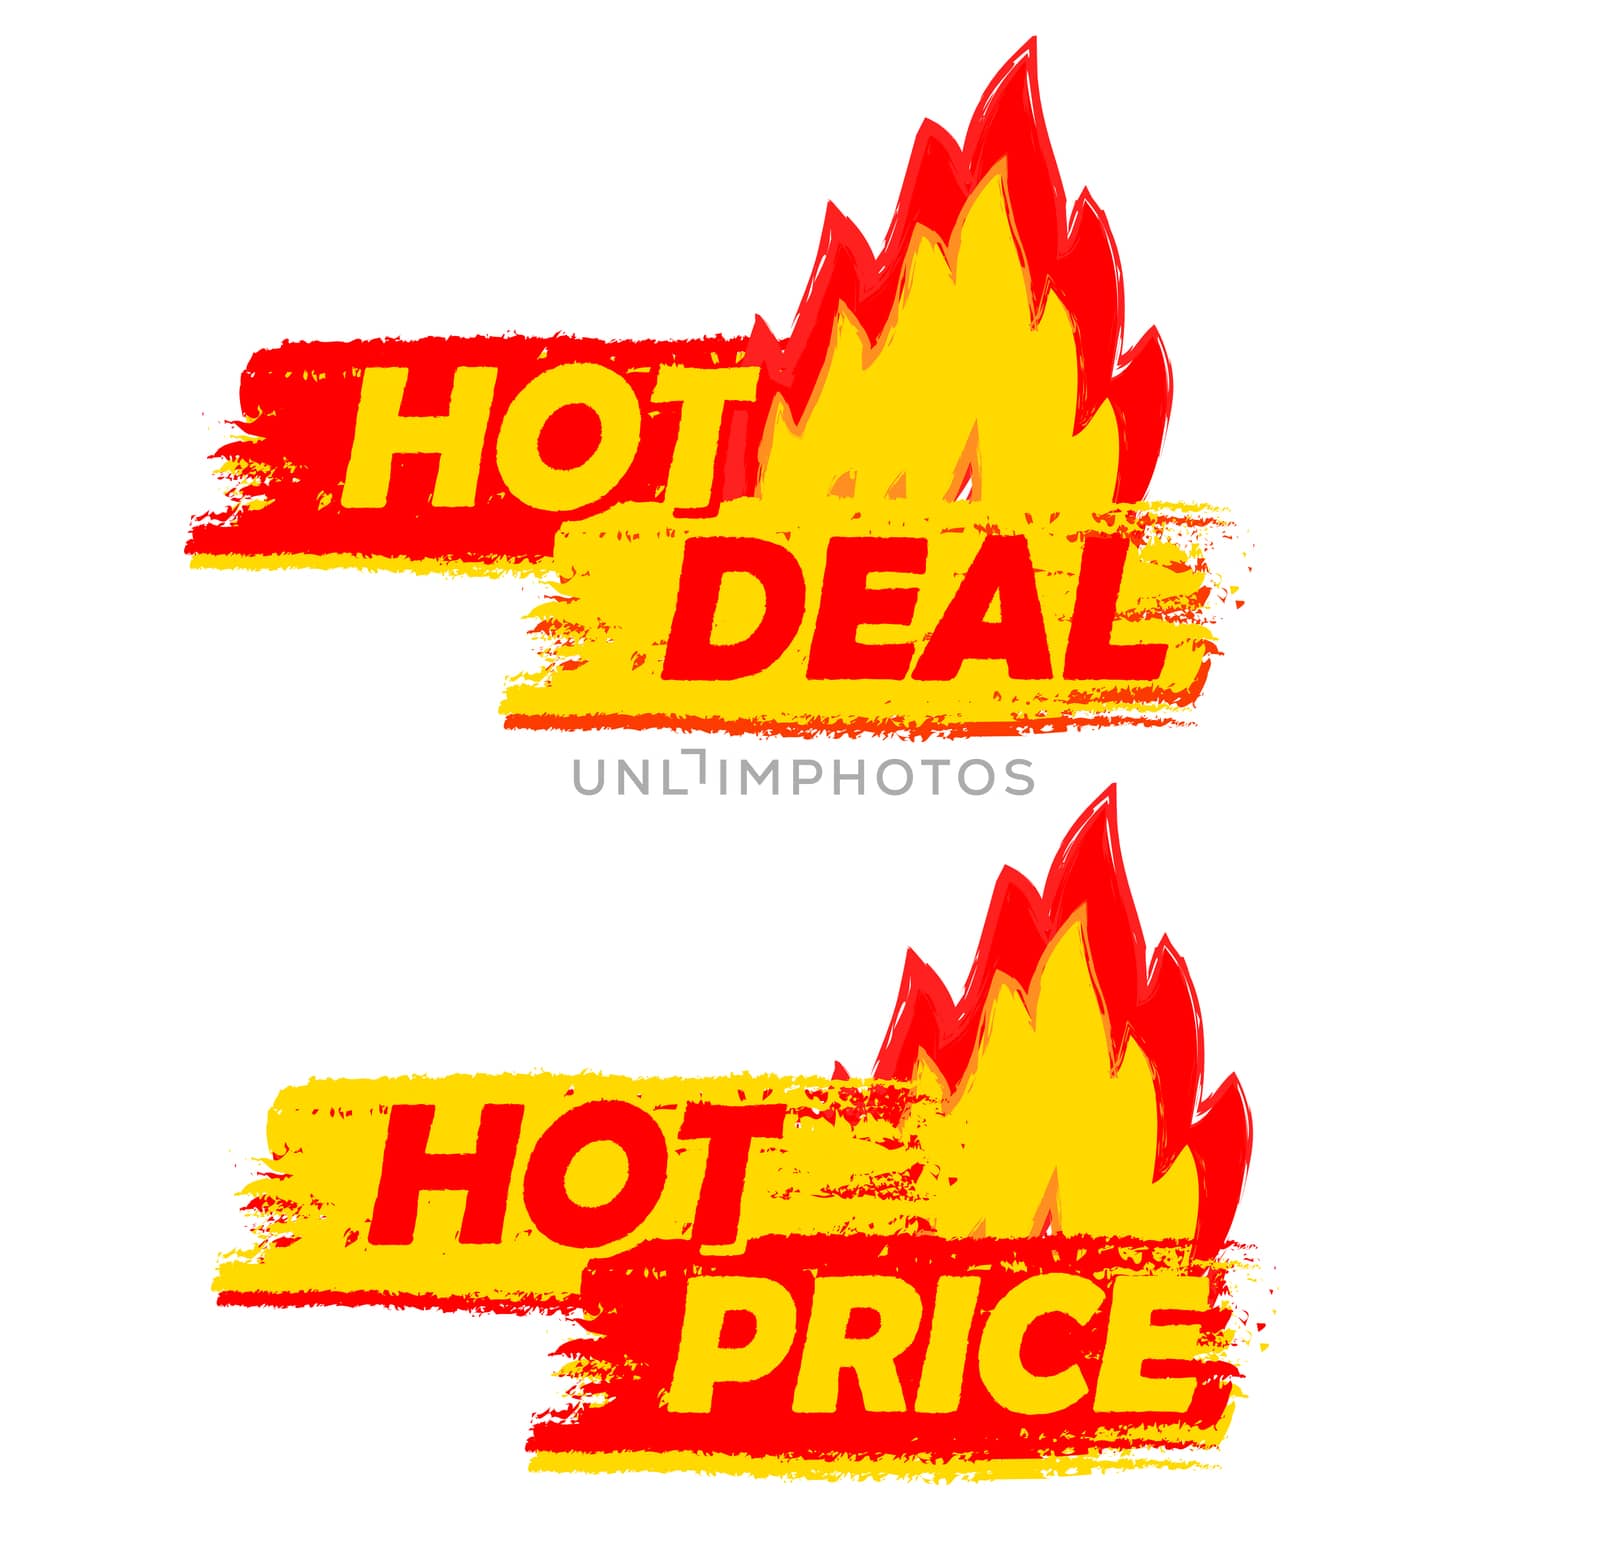 hot deal and price on fire banners - text in yellow and red drawn labels with flames signs, business shopping concept